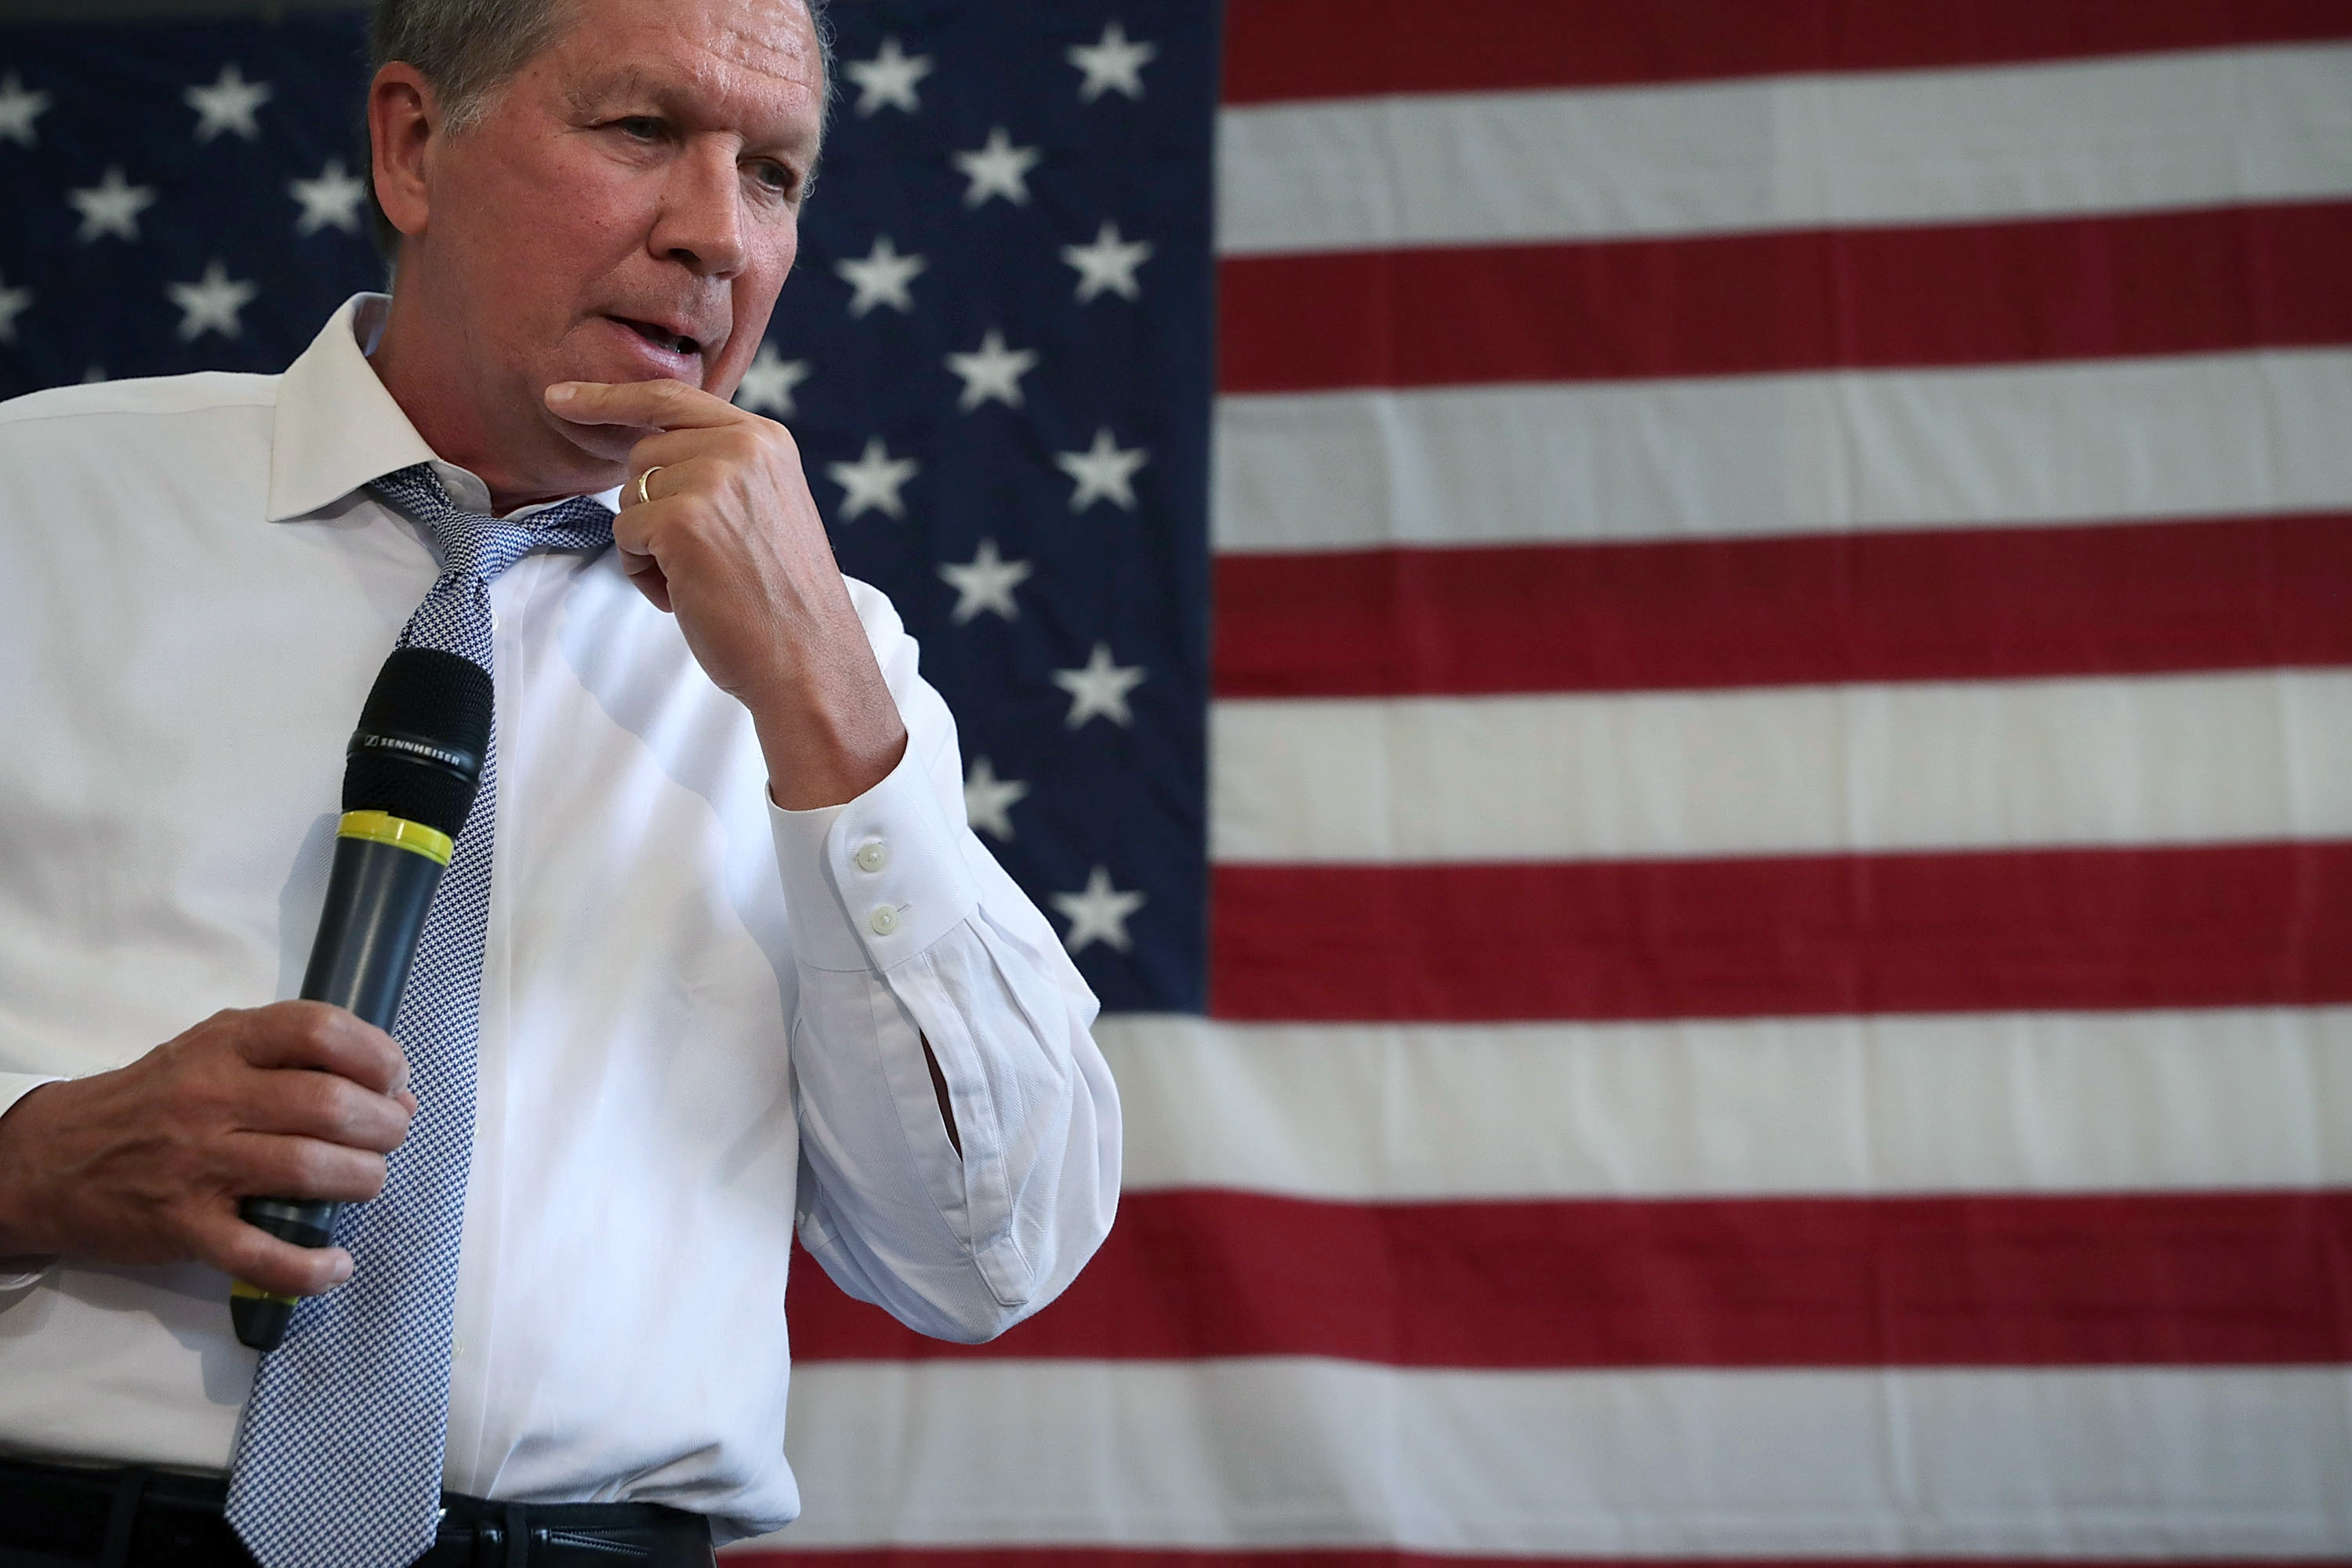 Republican presidential candidate and Ohio Governor John Kasich pauses during a campaign event on April 25, 2016 in Rockville, Maryland. (Alex Wong&mdash;Getty Images)